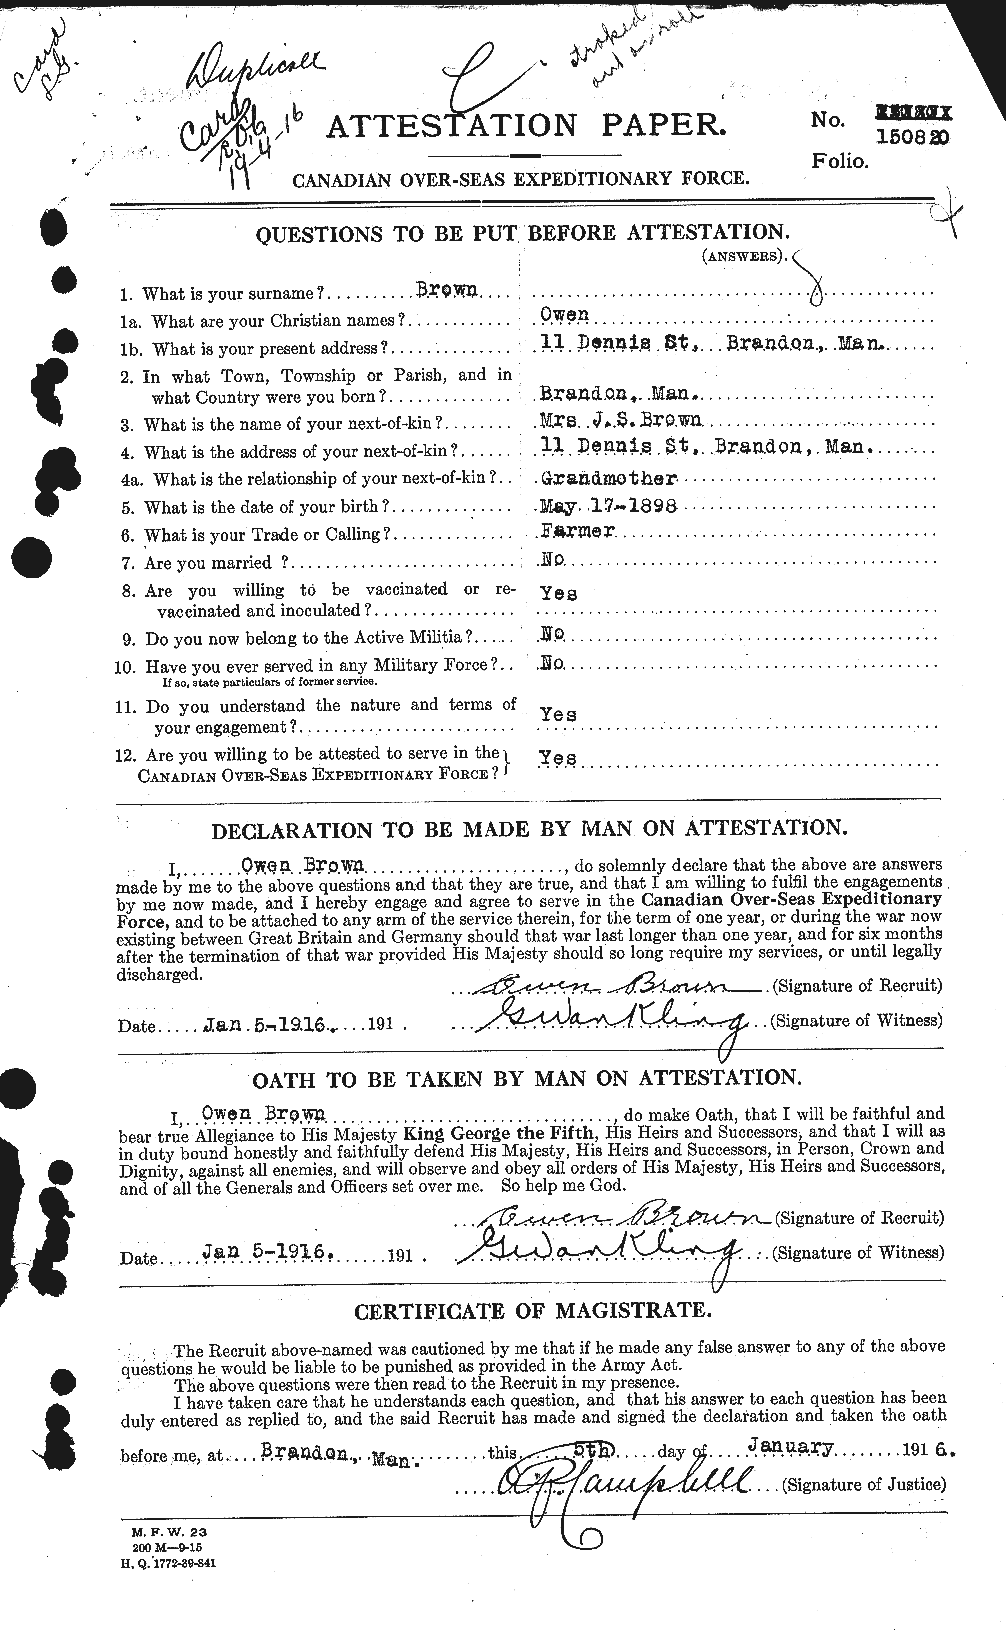 Personnel Records of the First World War - CEF 267147a